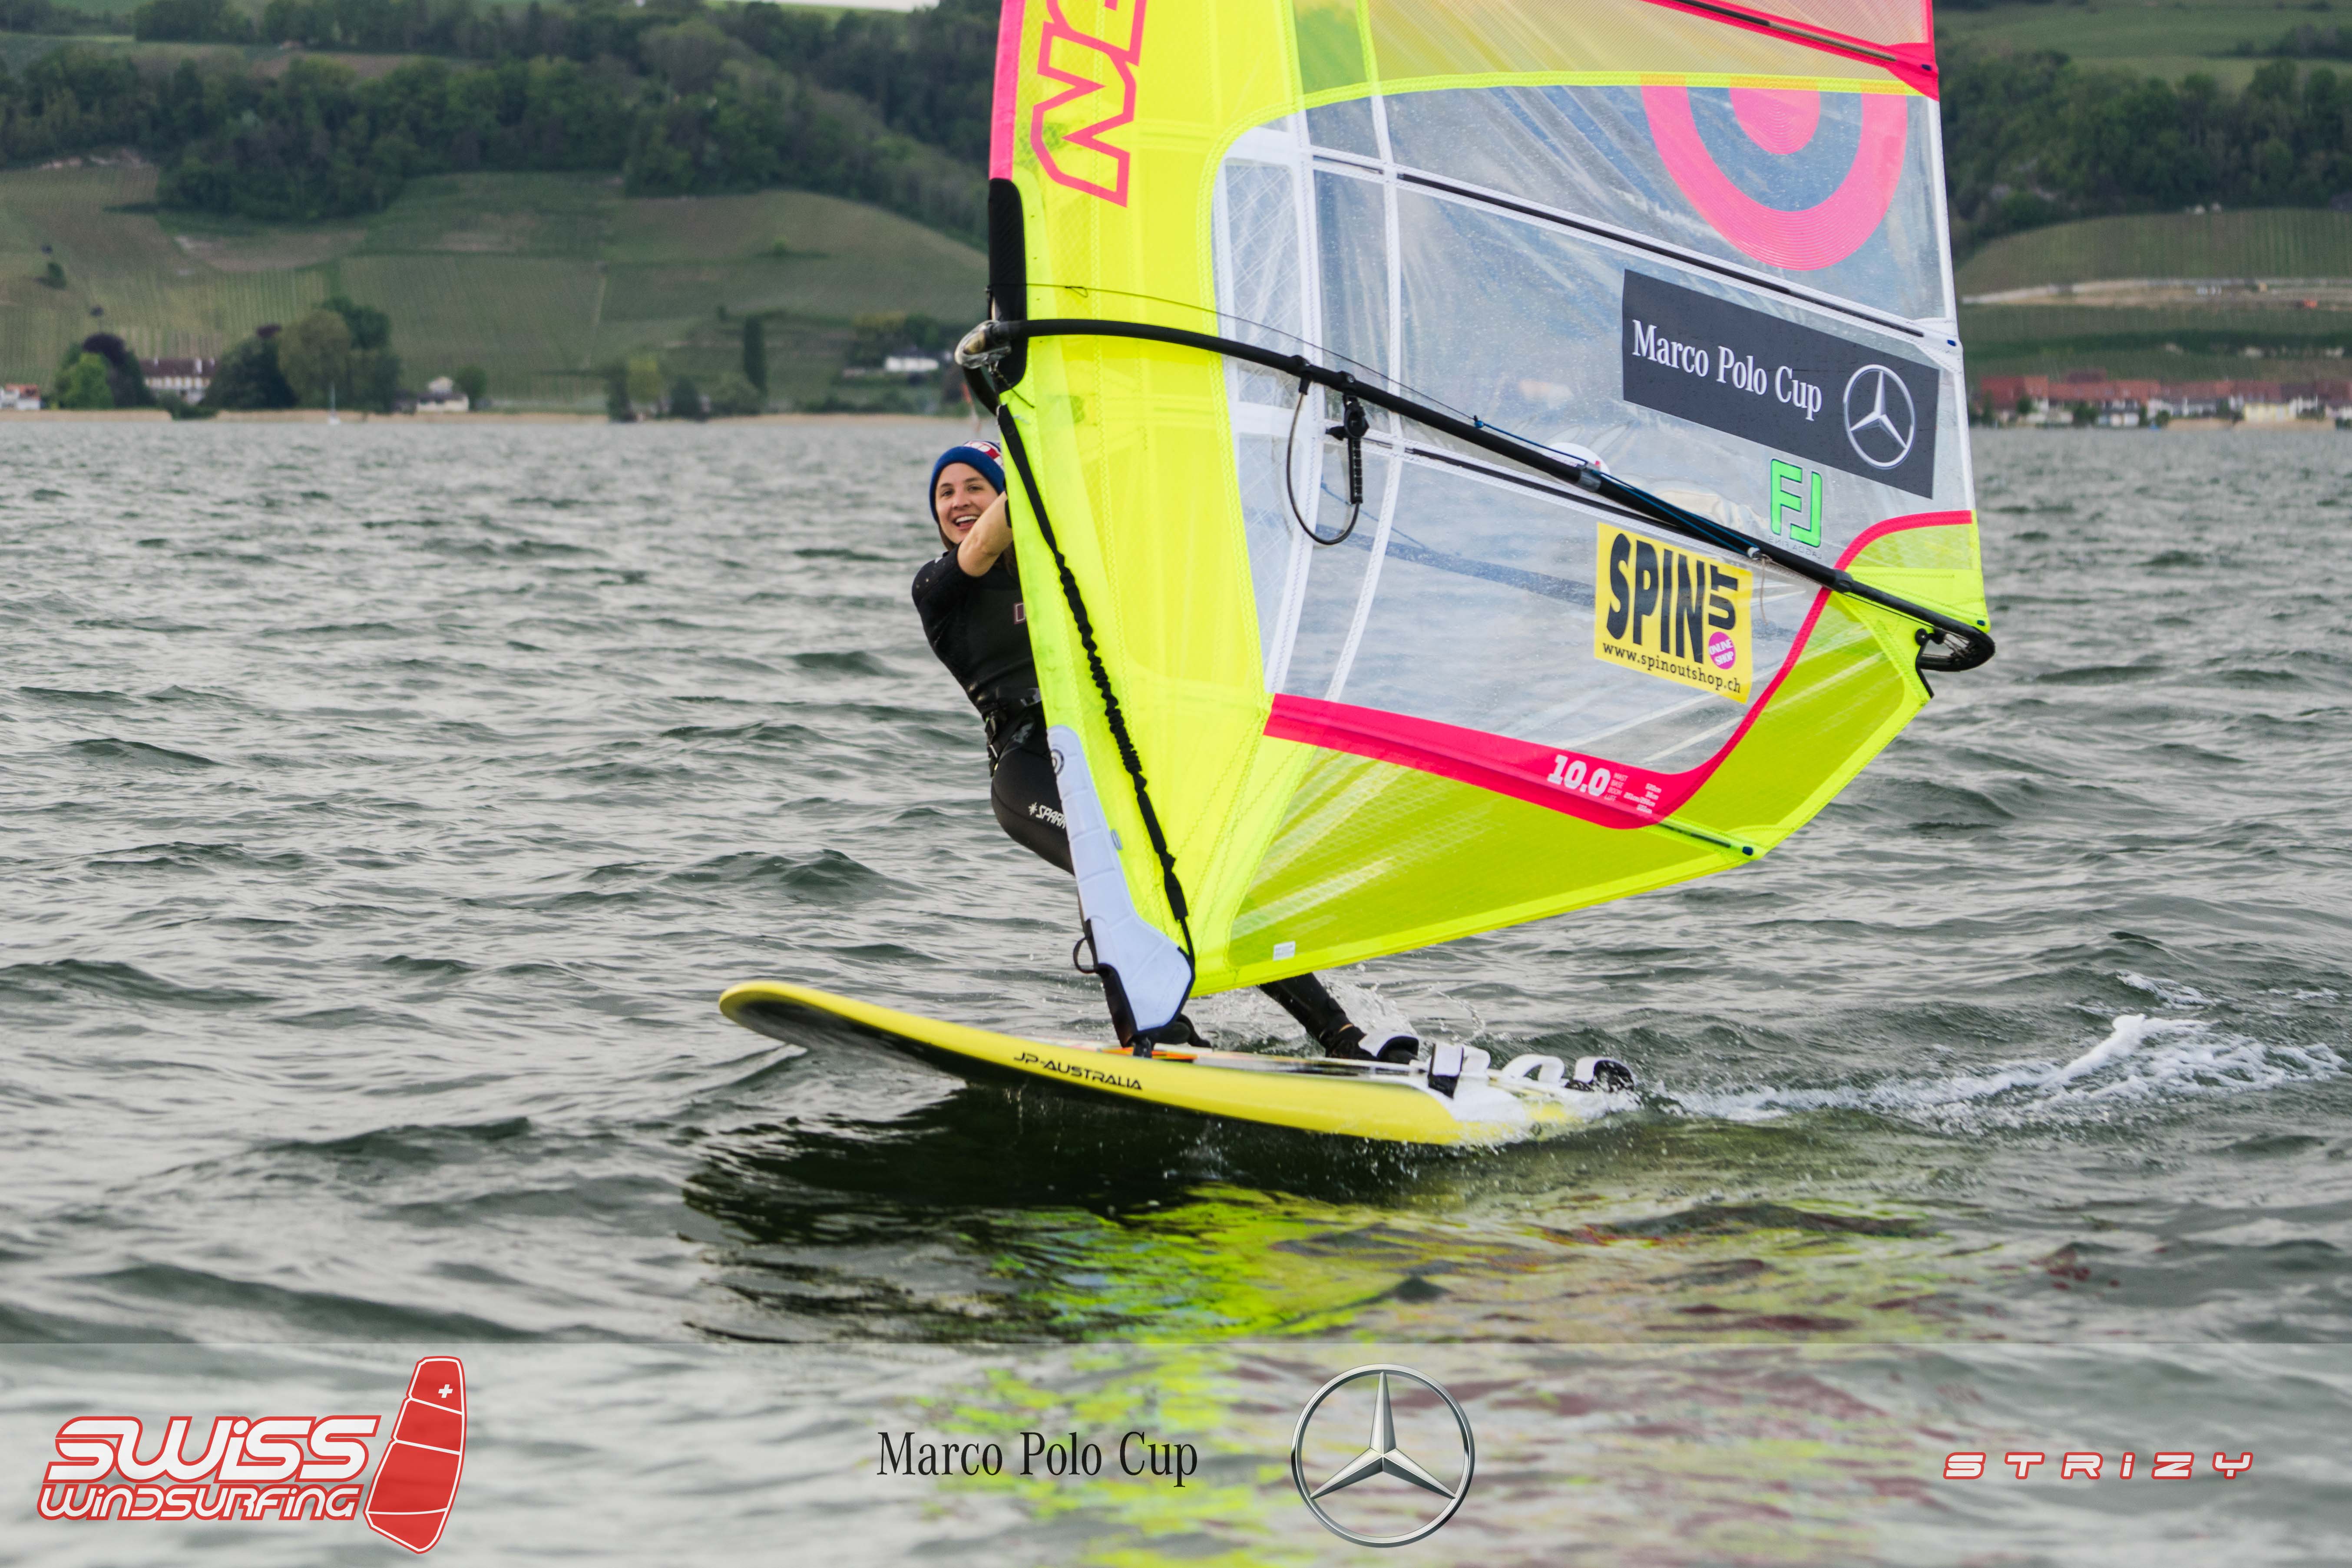  Windsurfing  Marco Polo Cup 2017  Slalom und Formula  Walensee  Final results